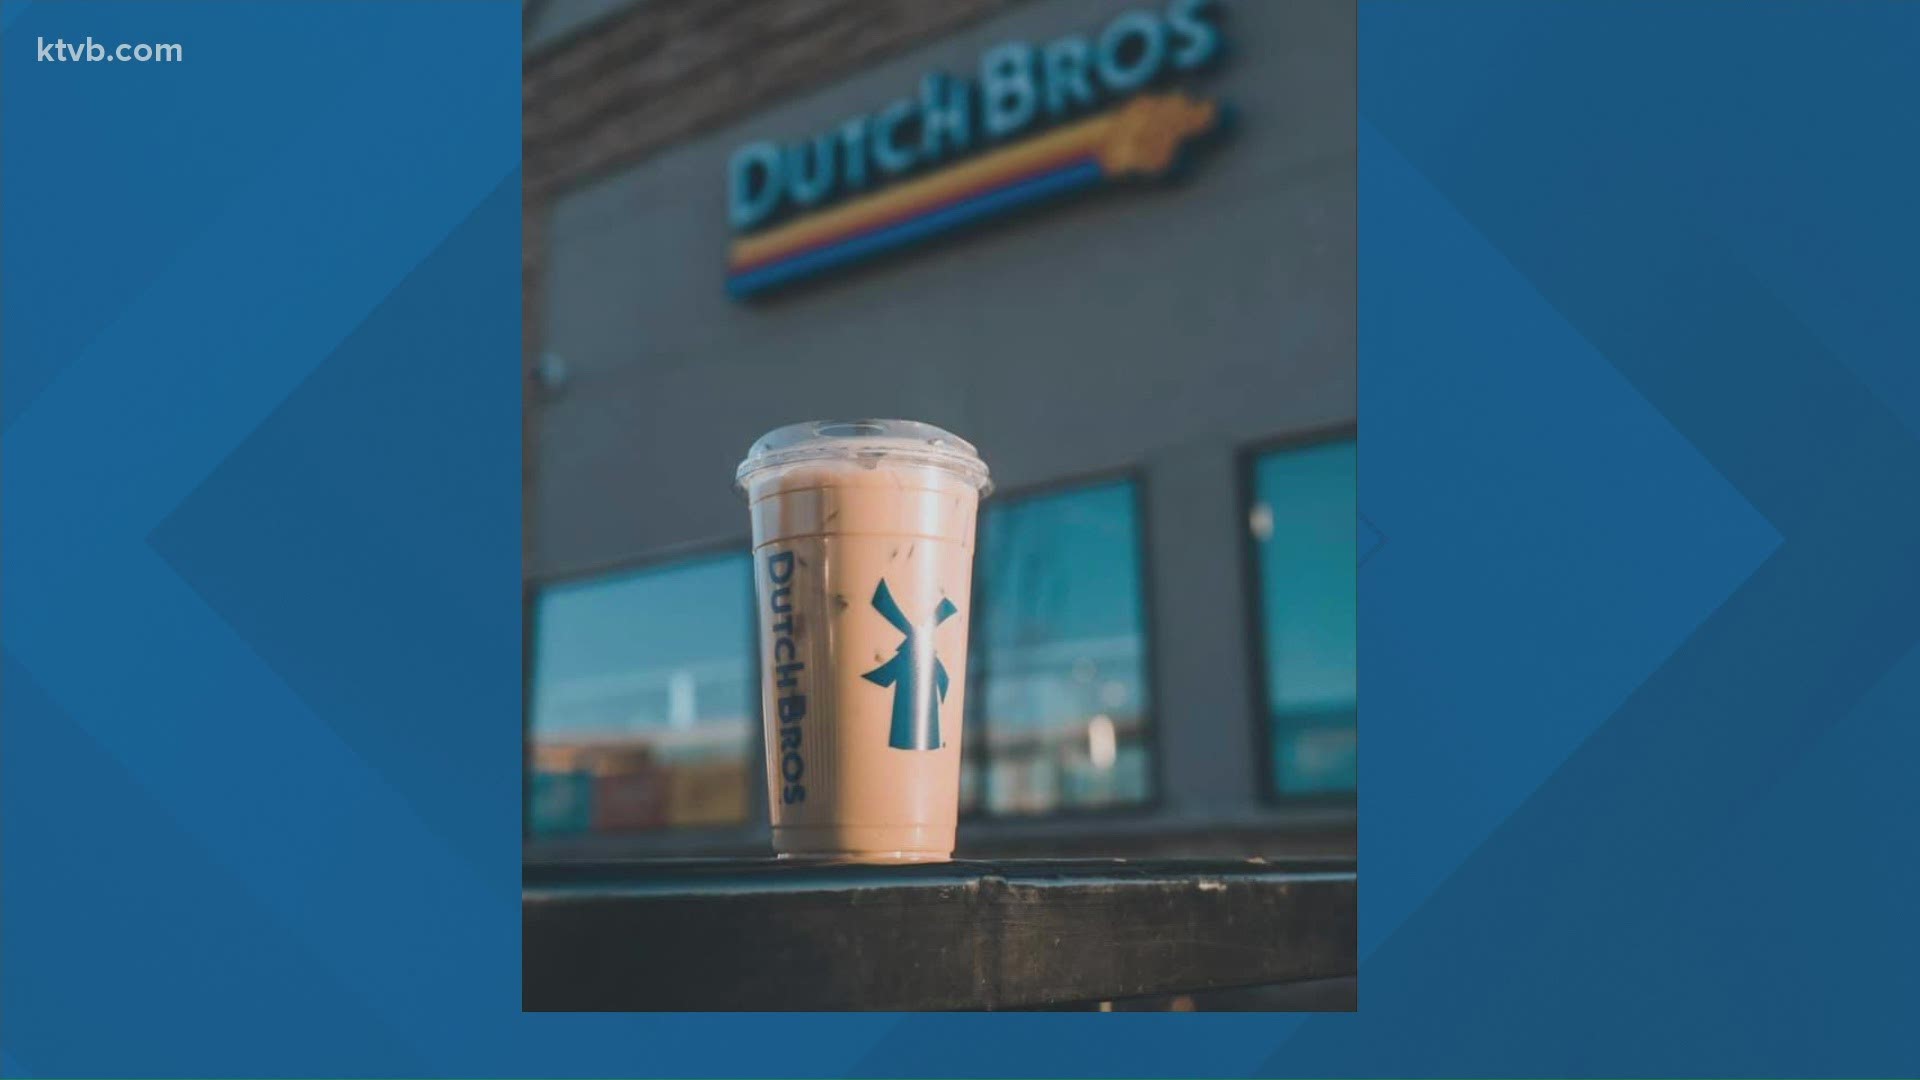 Dutch Bros will donate $1 for each drink sale Monday to help a local nonprofit that benefits women looking to get a job.